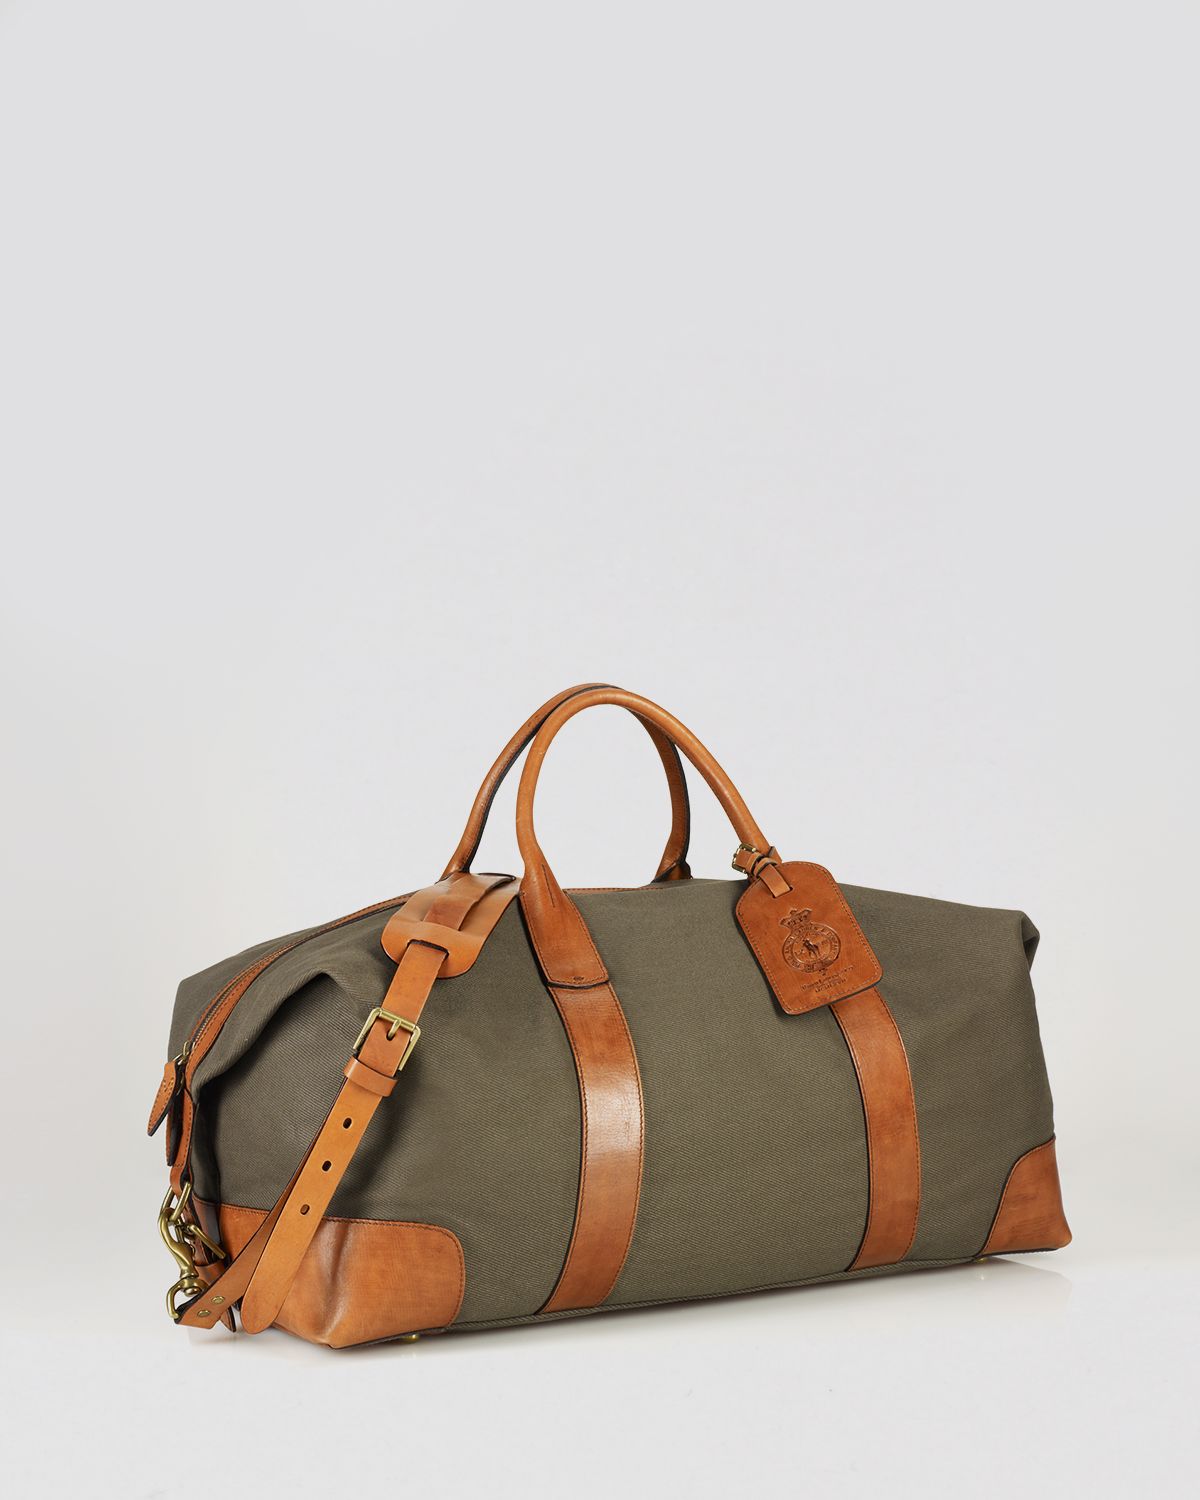 Lyst - Ralph Lauren Polo Canvas & Leather Duffel Bag in Green for Men